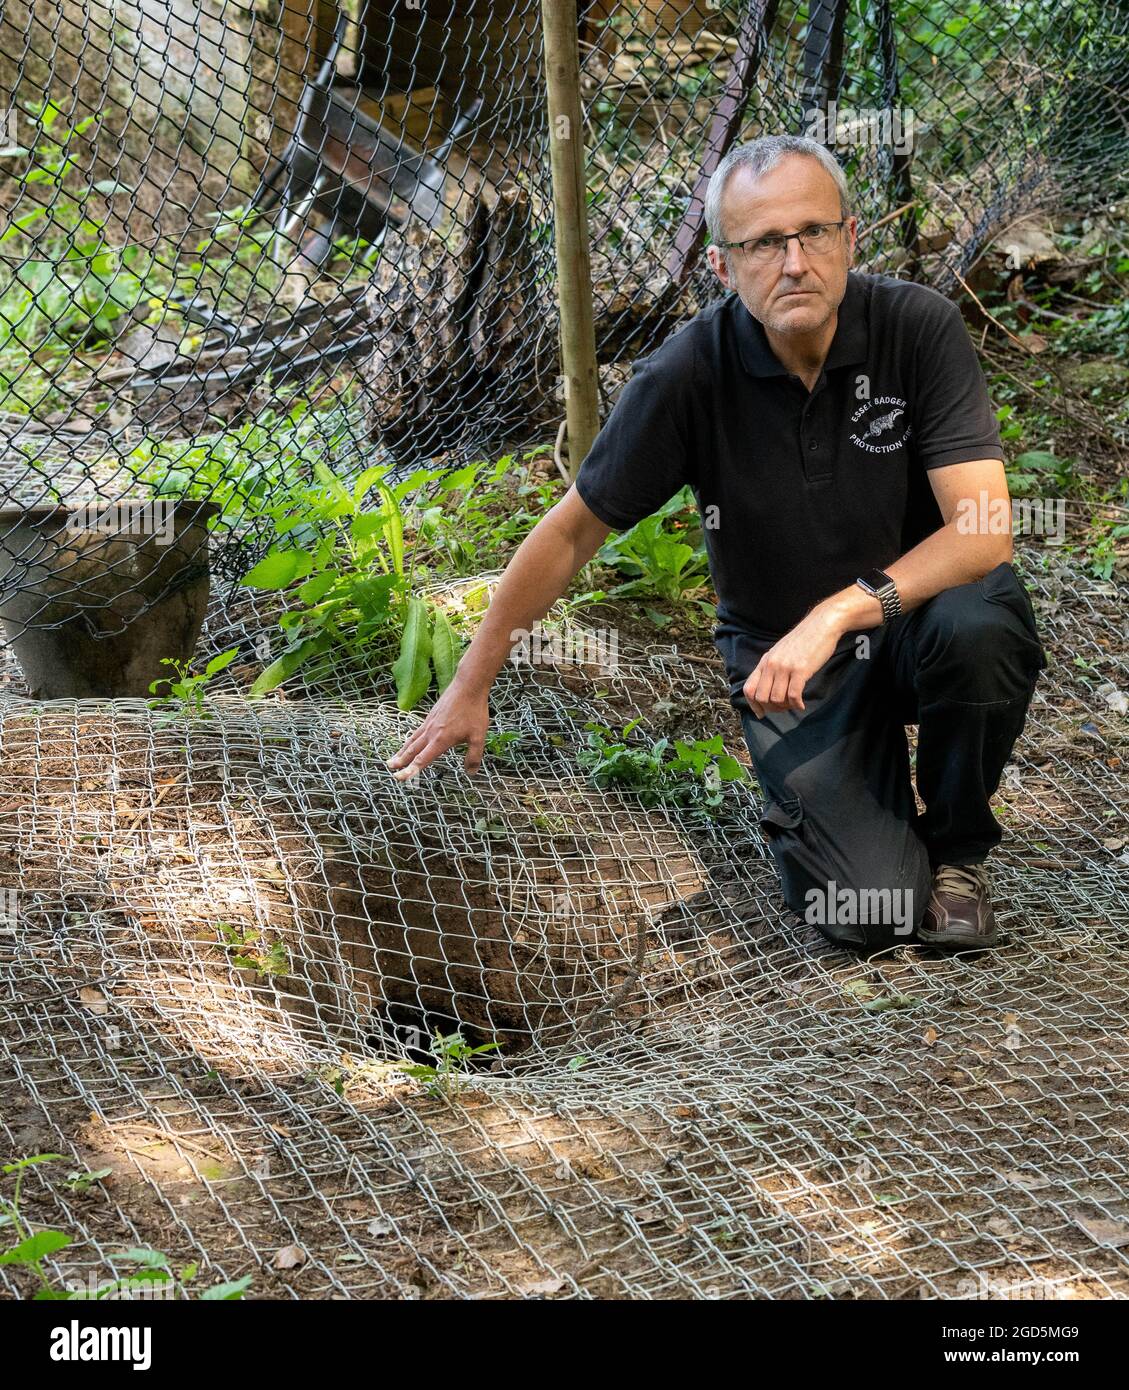 Brentwood Essex 11th August 2021 Brentwood Brough Council has been accused of ecological terrorism for closing off a large (16 hole) badger sett, allegedly to expatiate housing development. The accusation was made by Darren Parker, vice chair of the Essex Badger Protection Group. The badger sett has been covered in wire to prevent the badgers using the set. Credit: Ian Davidson/Alamy Live News Stock Photo